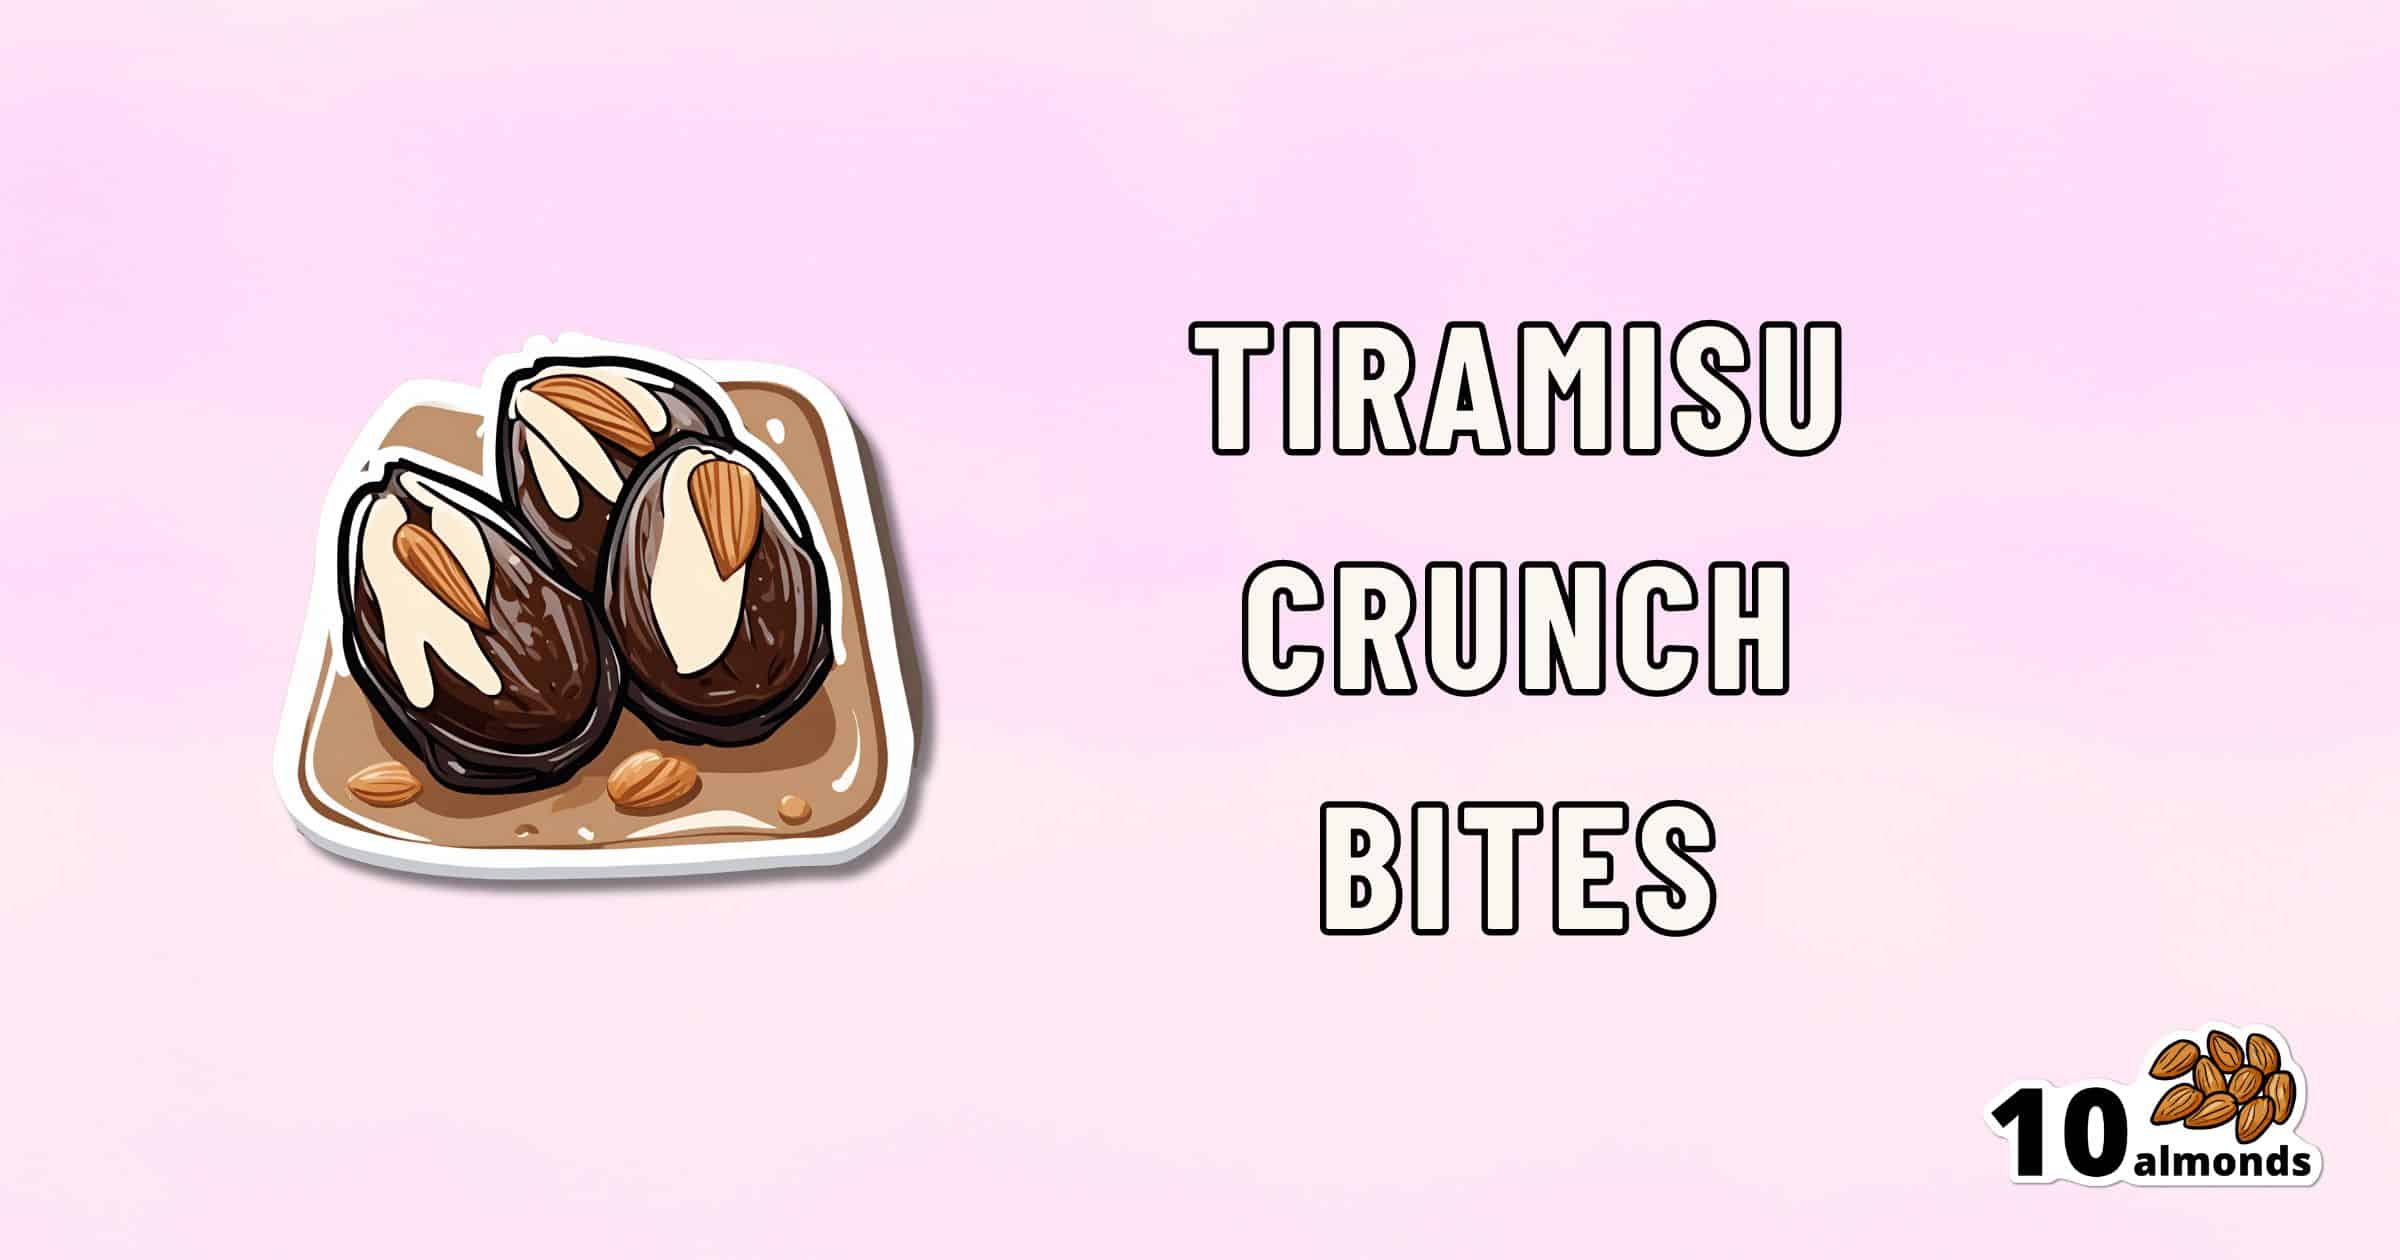 An illustration of three Tiramisu crunch bites on a plate with almonds around them is on the left. The text "TIRAMISU CRUNCH BITES" is to the right of the illustration. In the bottom right corner, there is an image of 10 almonds accompanied by the number 10.